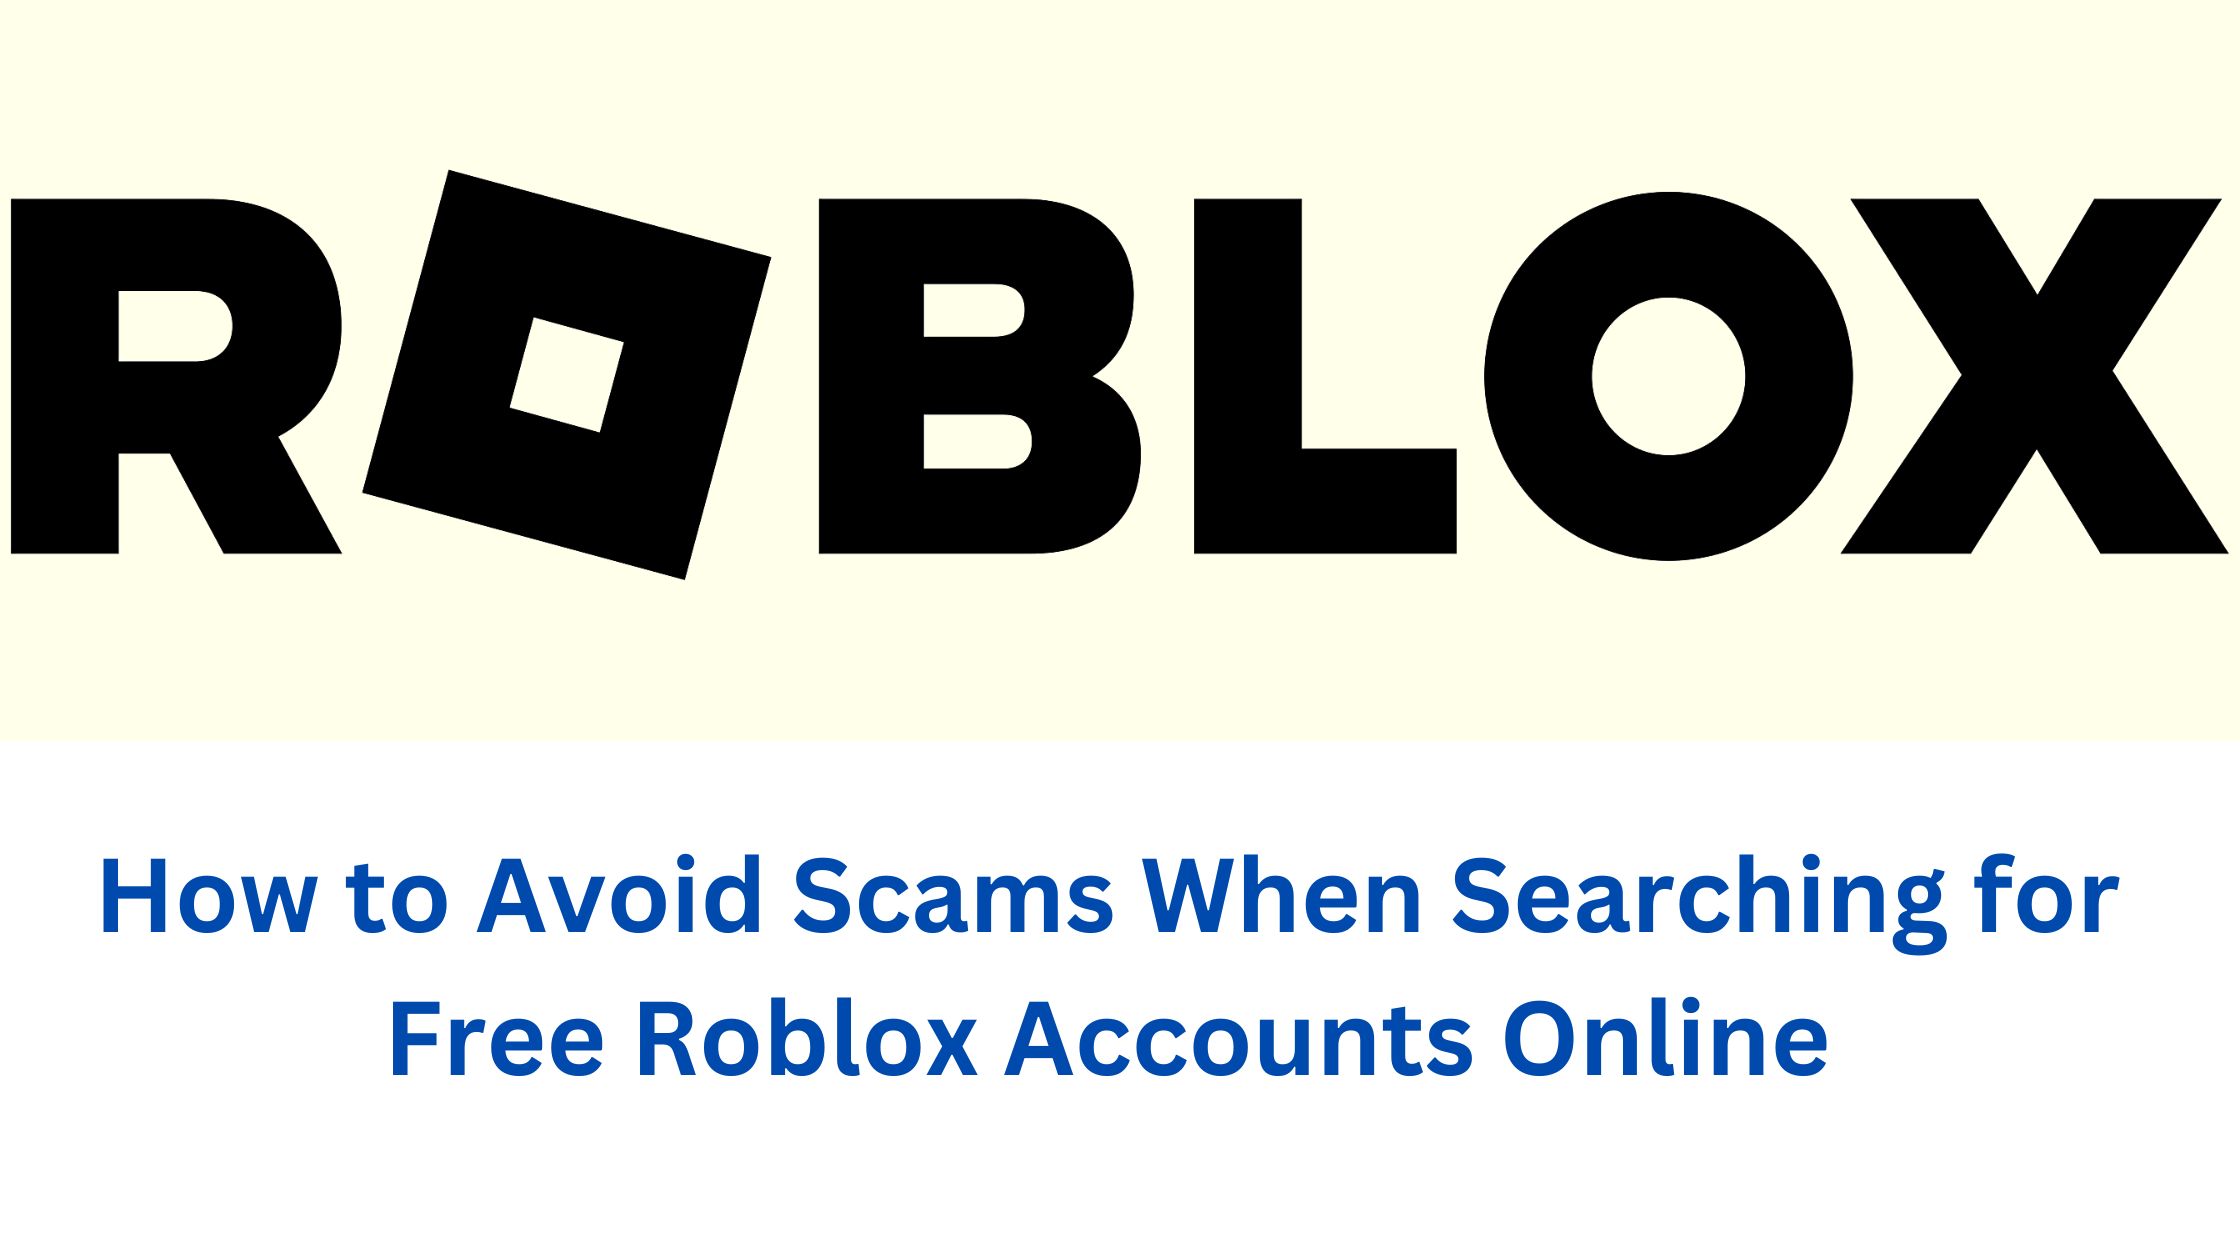 What is the Robux Generator Scam? How to avoid it?